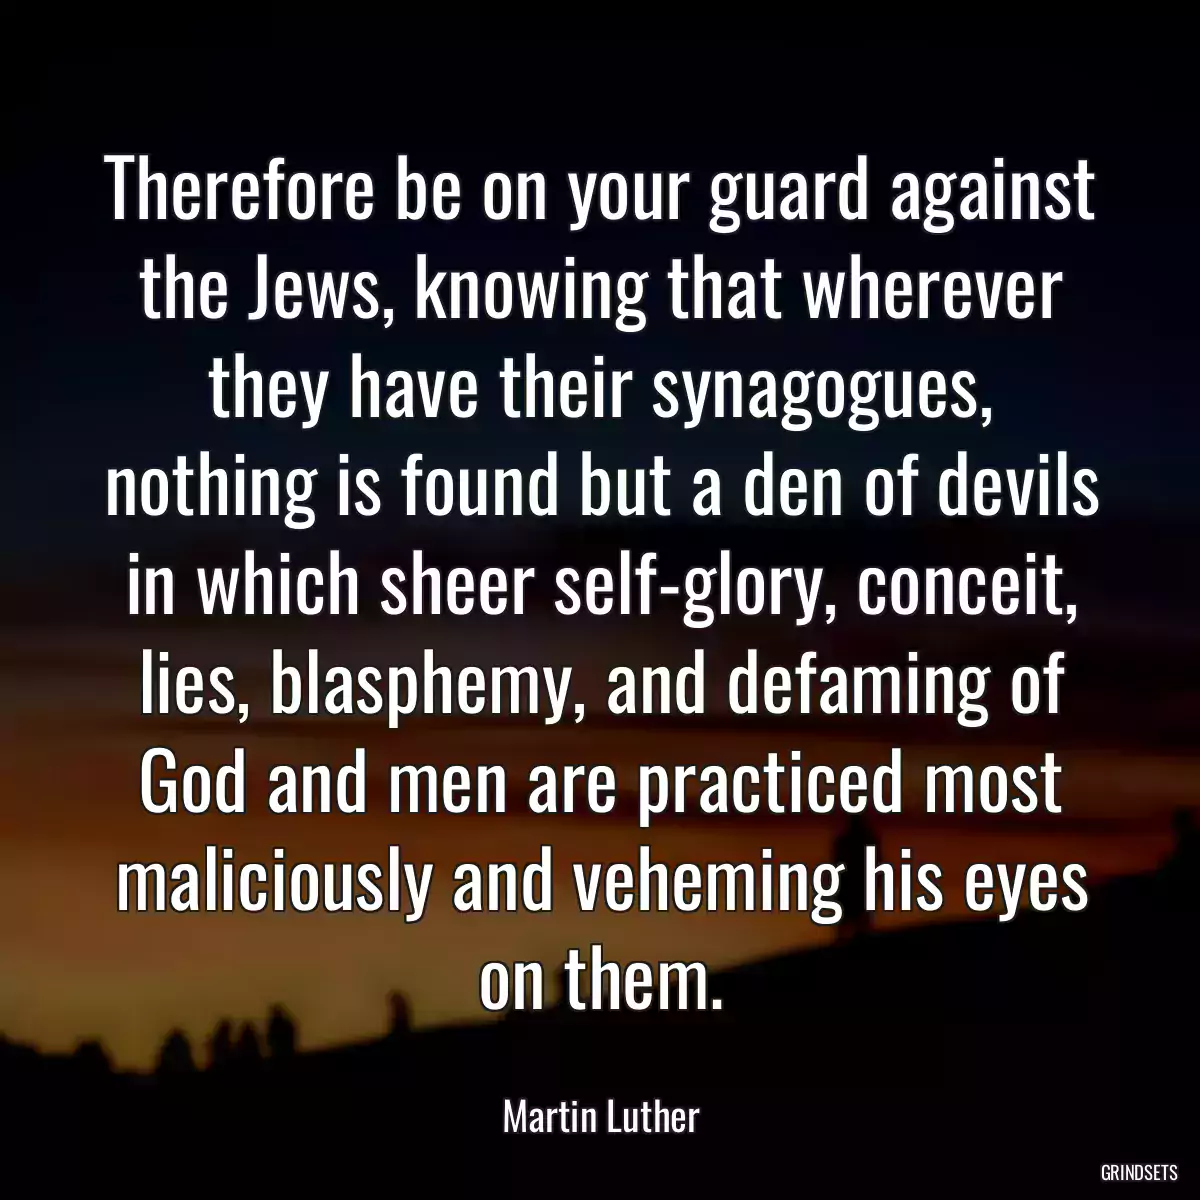 Therefore be on your guard against the Jews, knowing that wherever they have their synagogues, nothing is found but a den of devils in which sheer self-glory, conceit, lies, blasphemy, and defaming of God and men are practiced most maliciously and veheming his eyes on them.